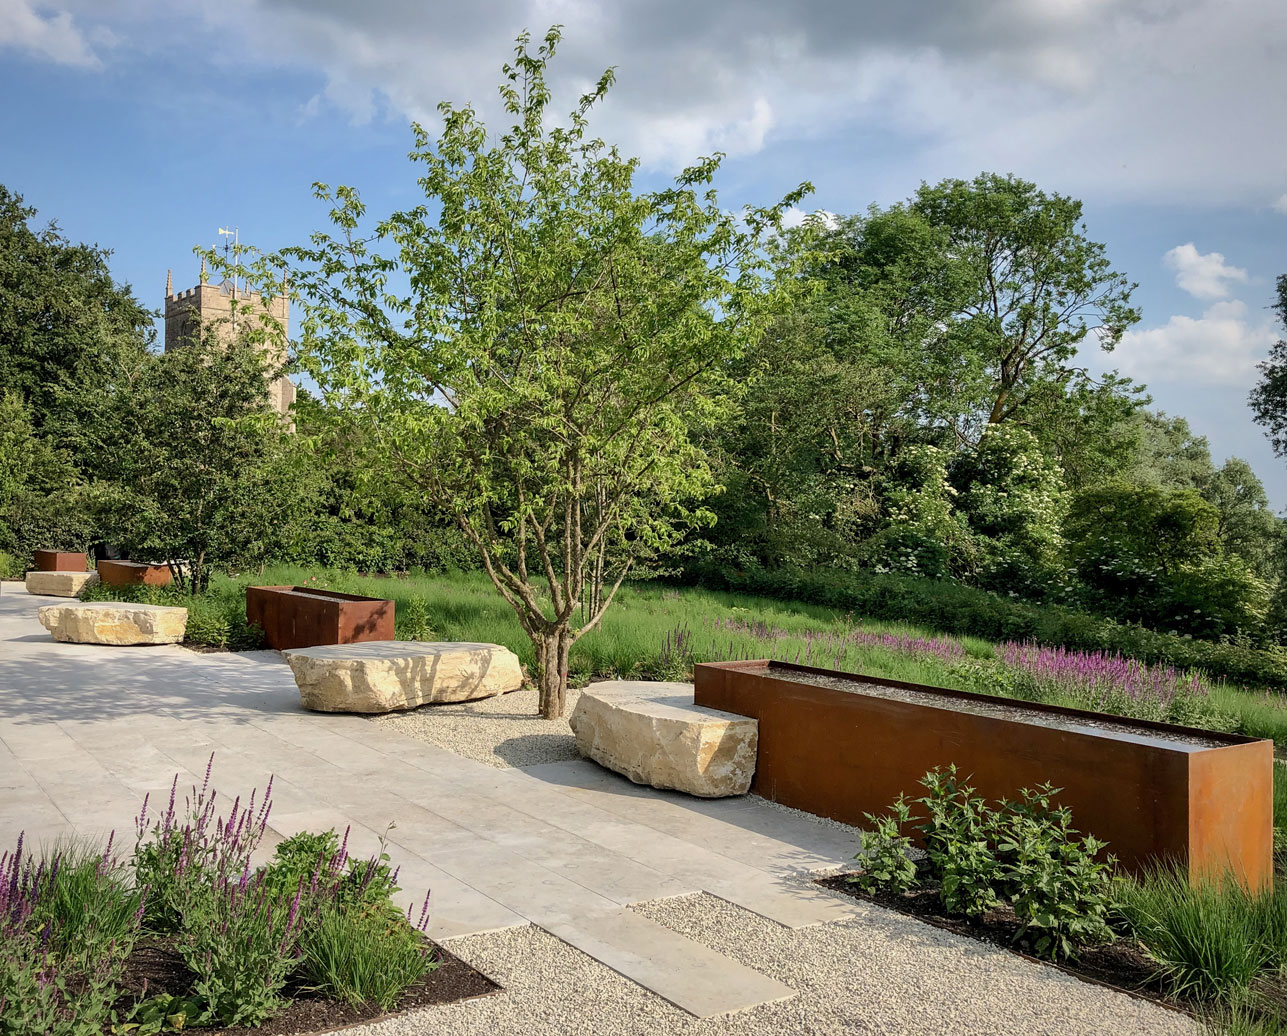 Colm Joseph Cambridgeshire modern garden design and contemporary landscape design with water feature of corten steel and limestone paving & boulders 